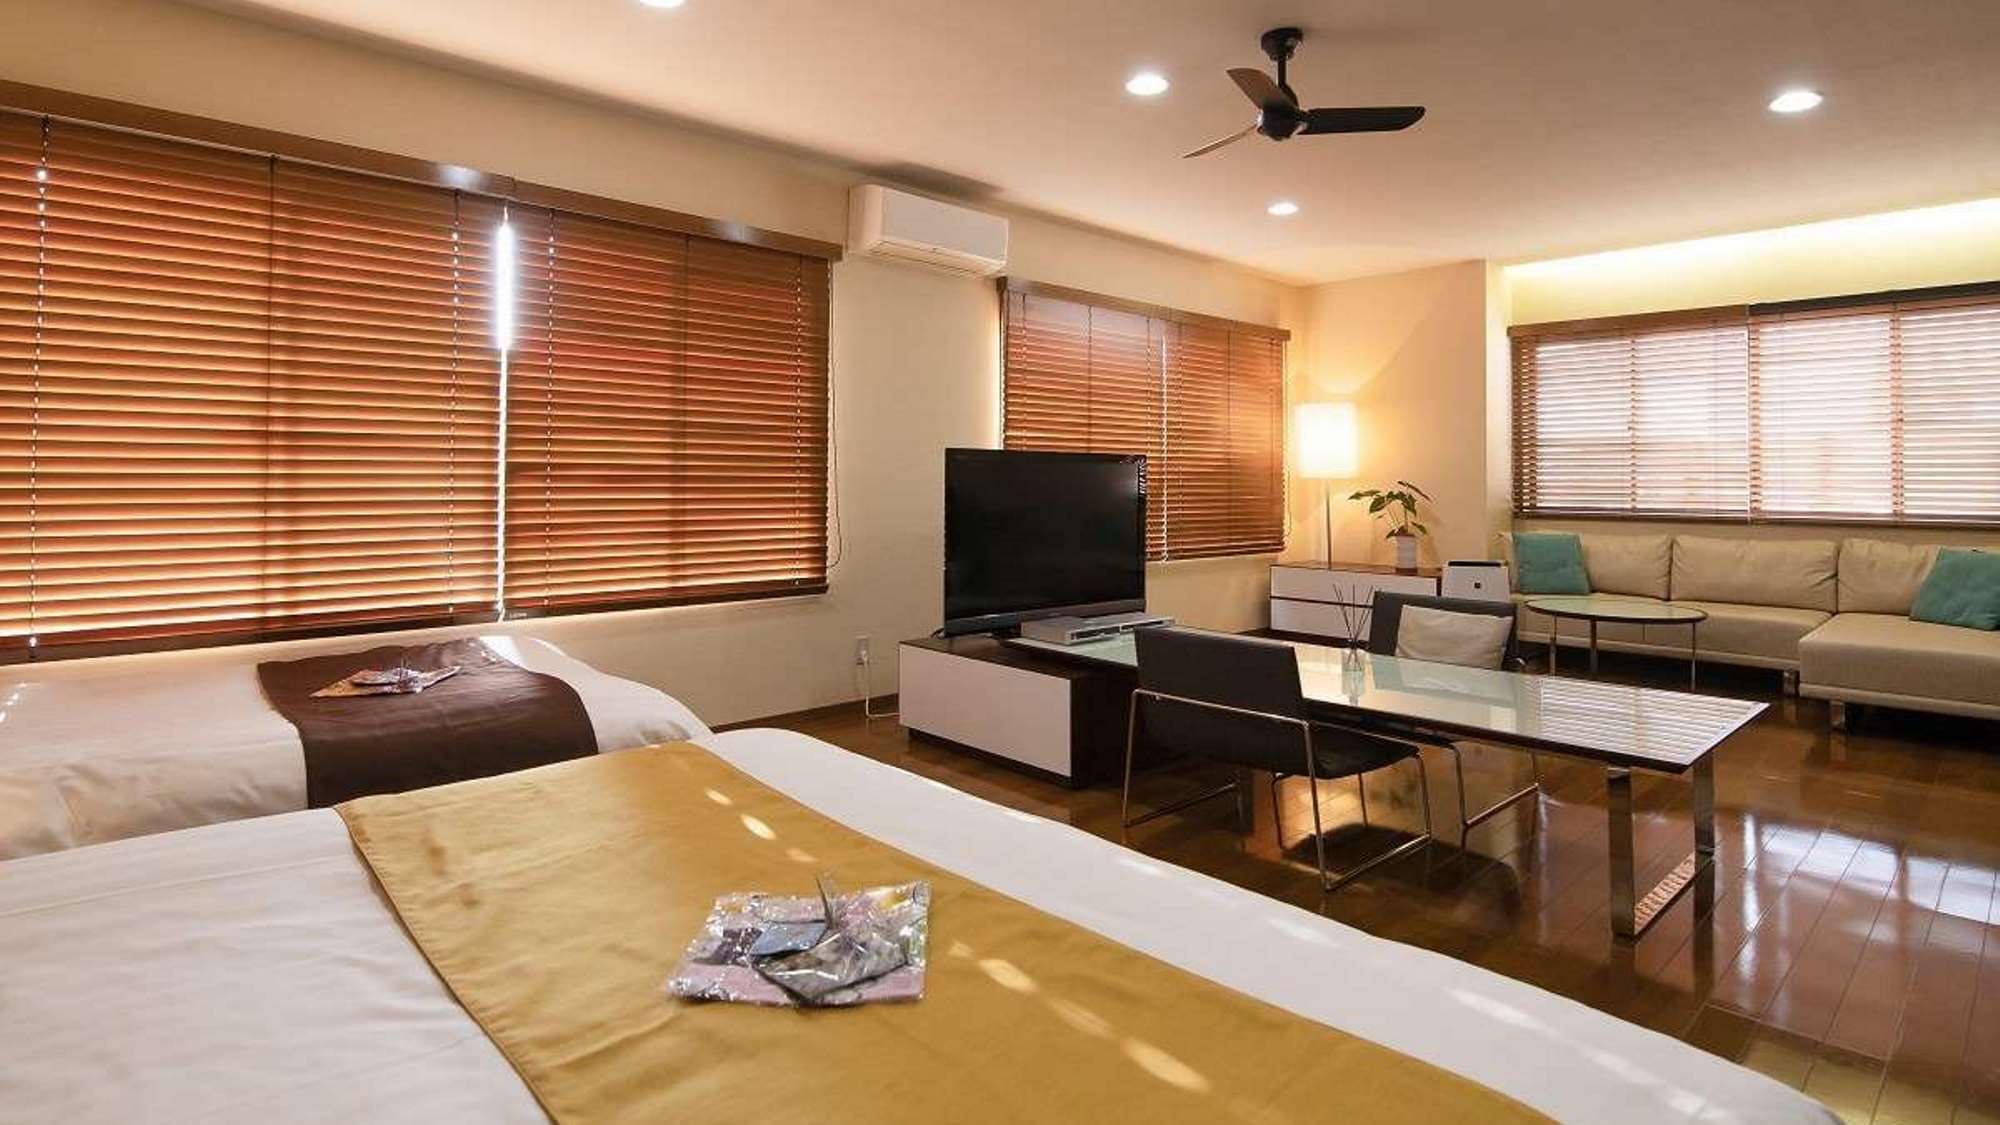 [Deluxe Twin Room] A room coordinated with a resort-like interior.